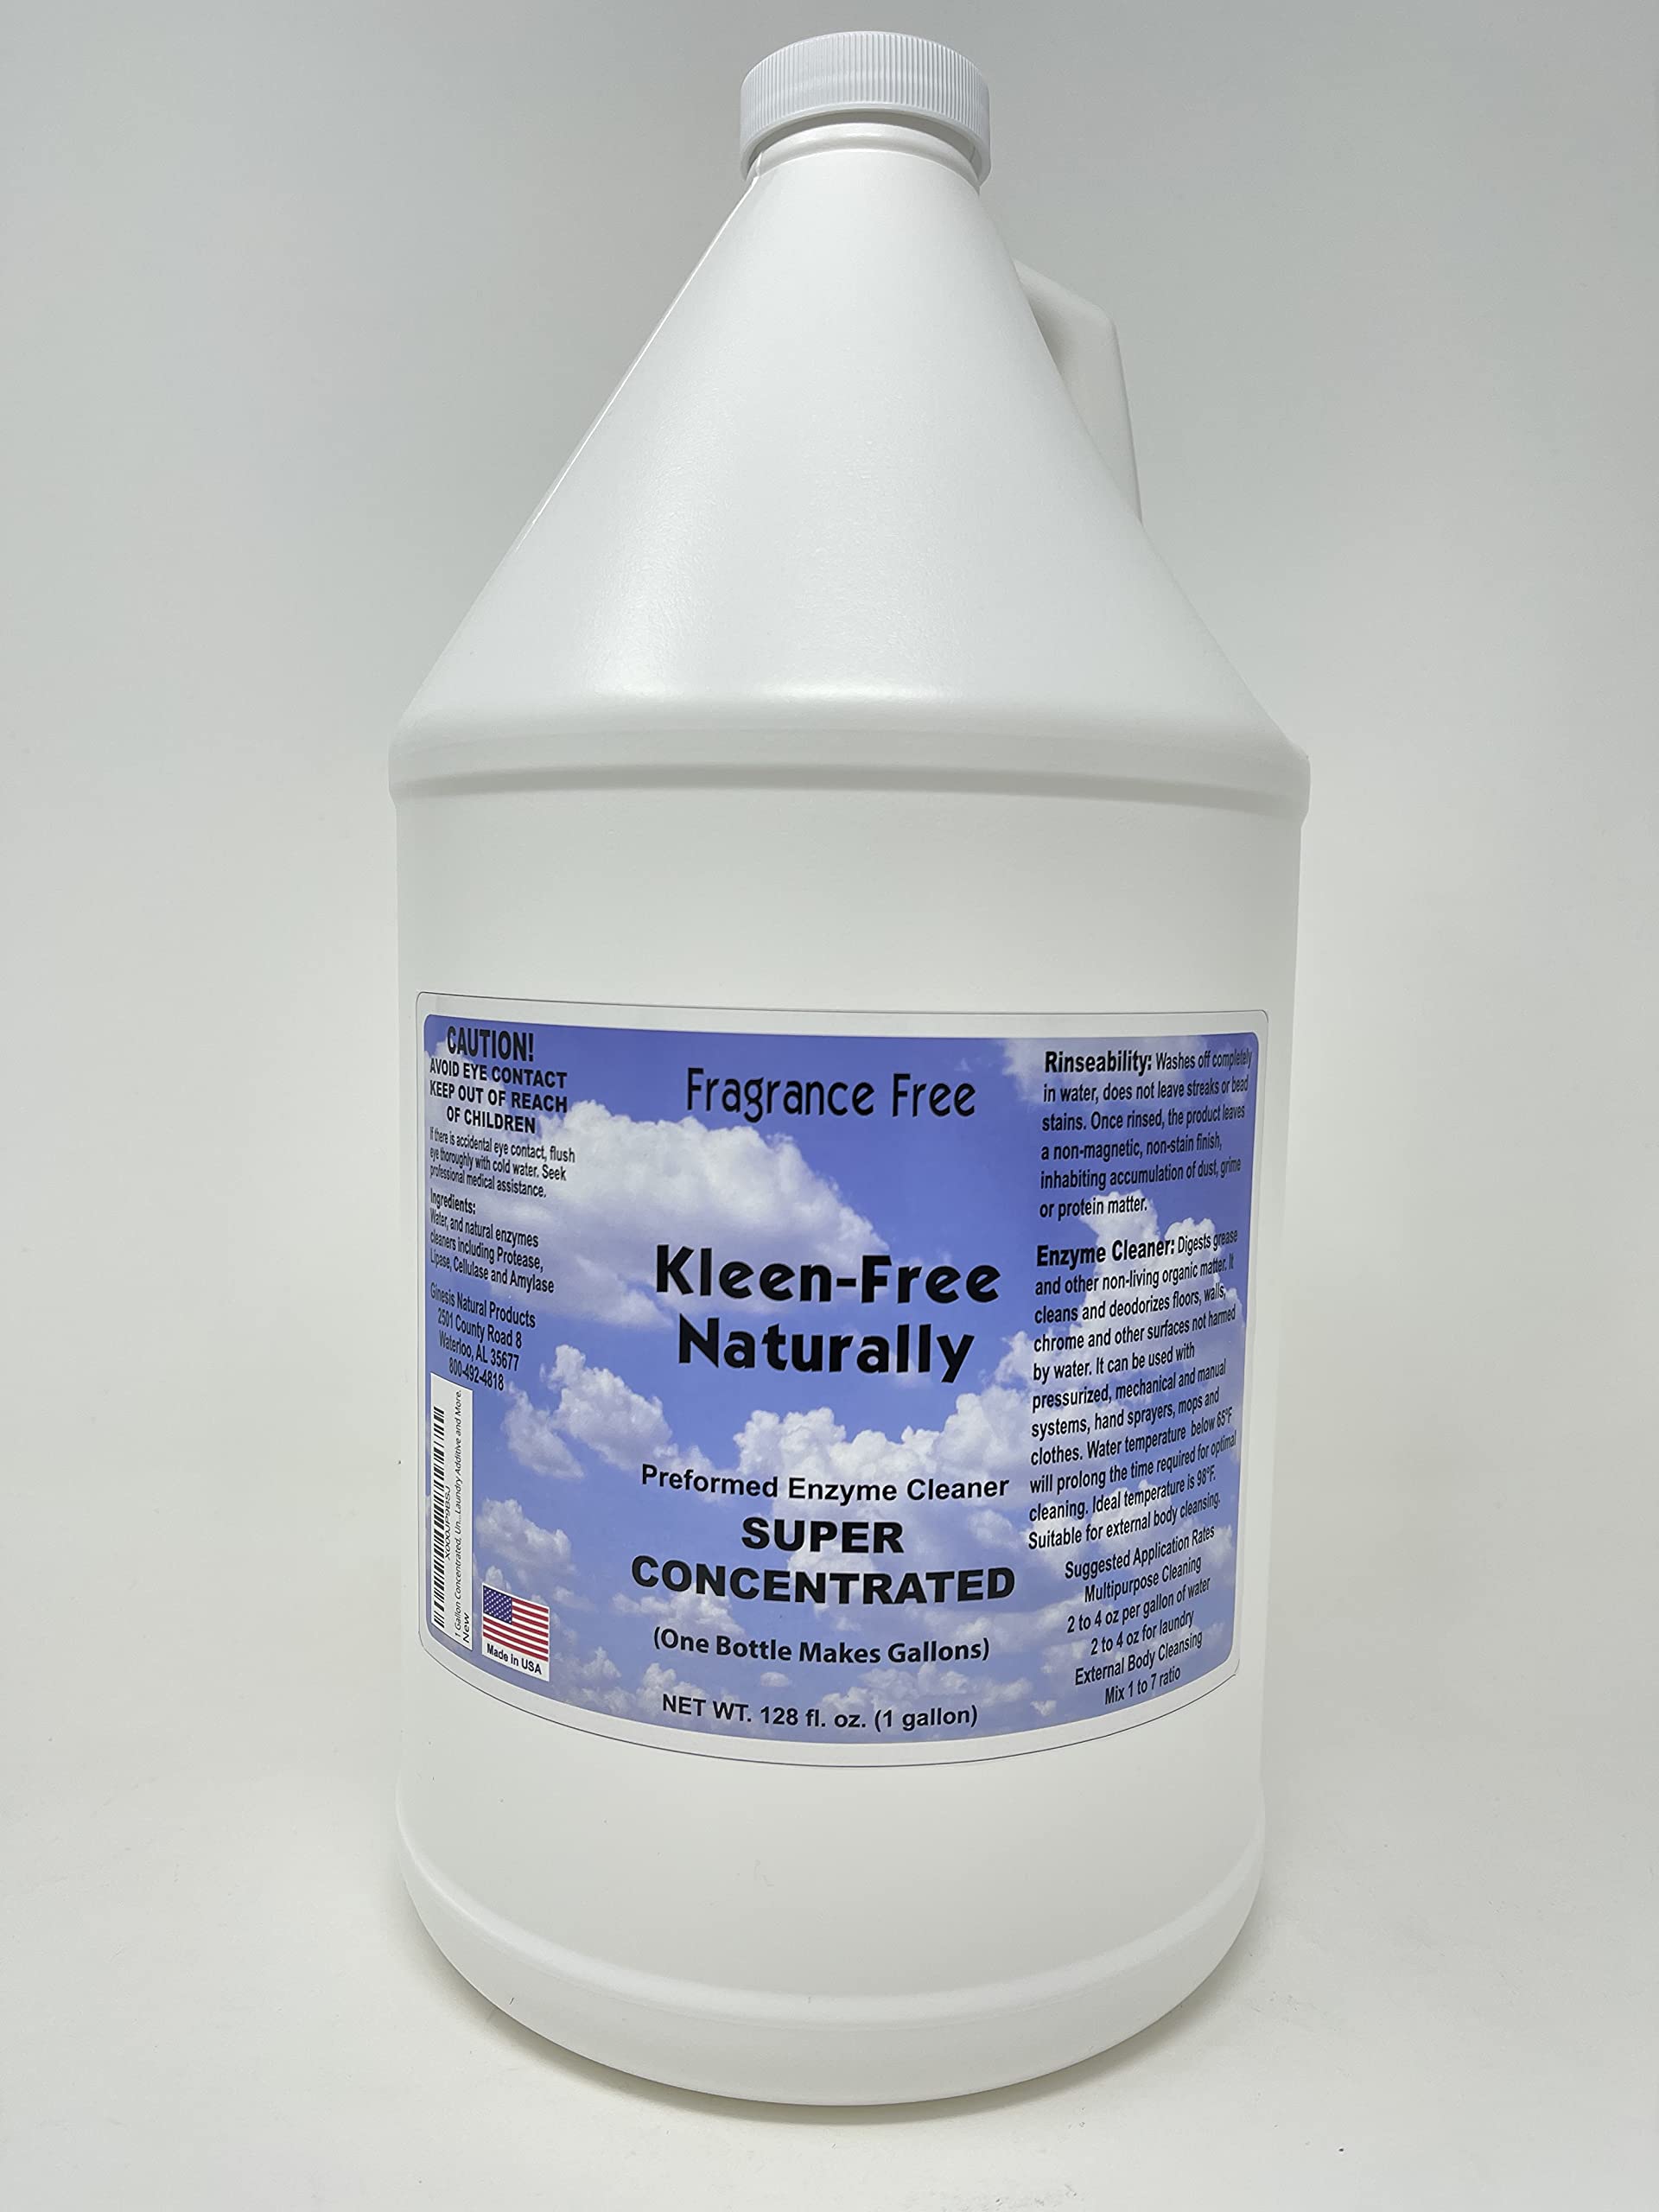 1 Gallon Concentrated, Unscented Fragrance Free, Kleen Free Naturally, Natural, Non-Toxic, Enzyme Solution and Multi-Purpose Product, Cleaner, Laun...